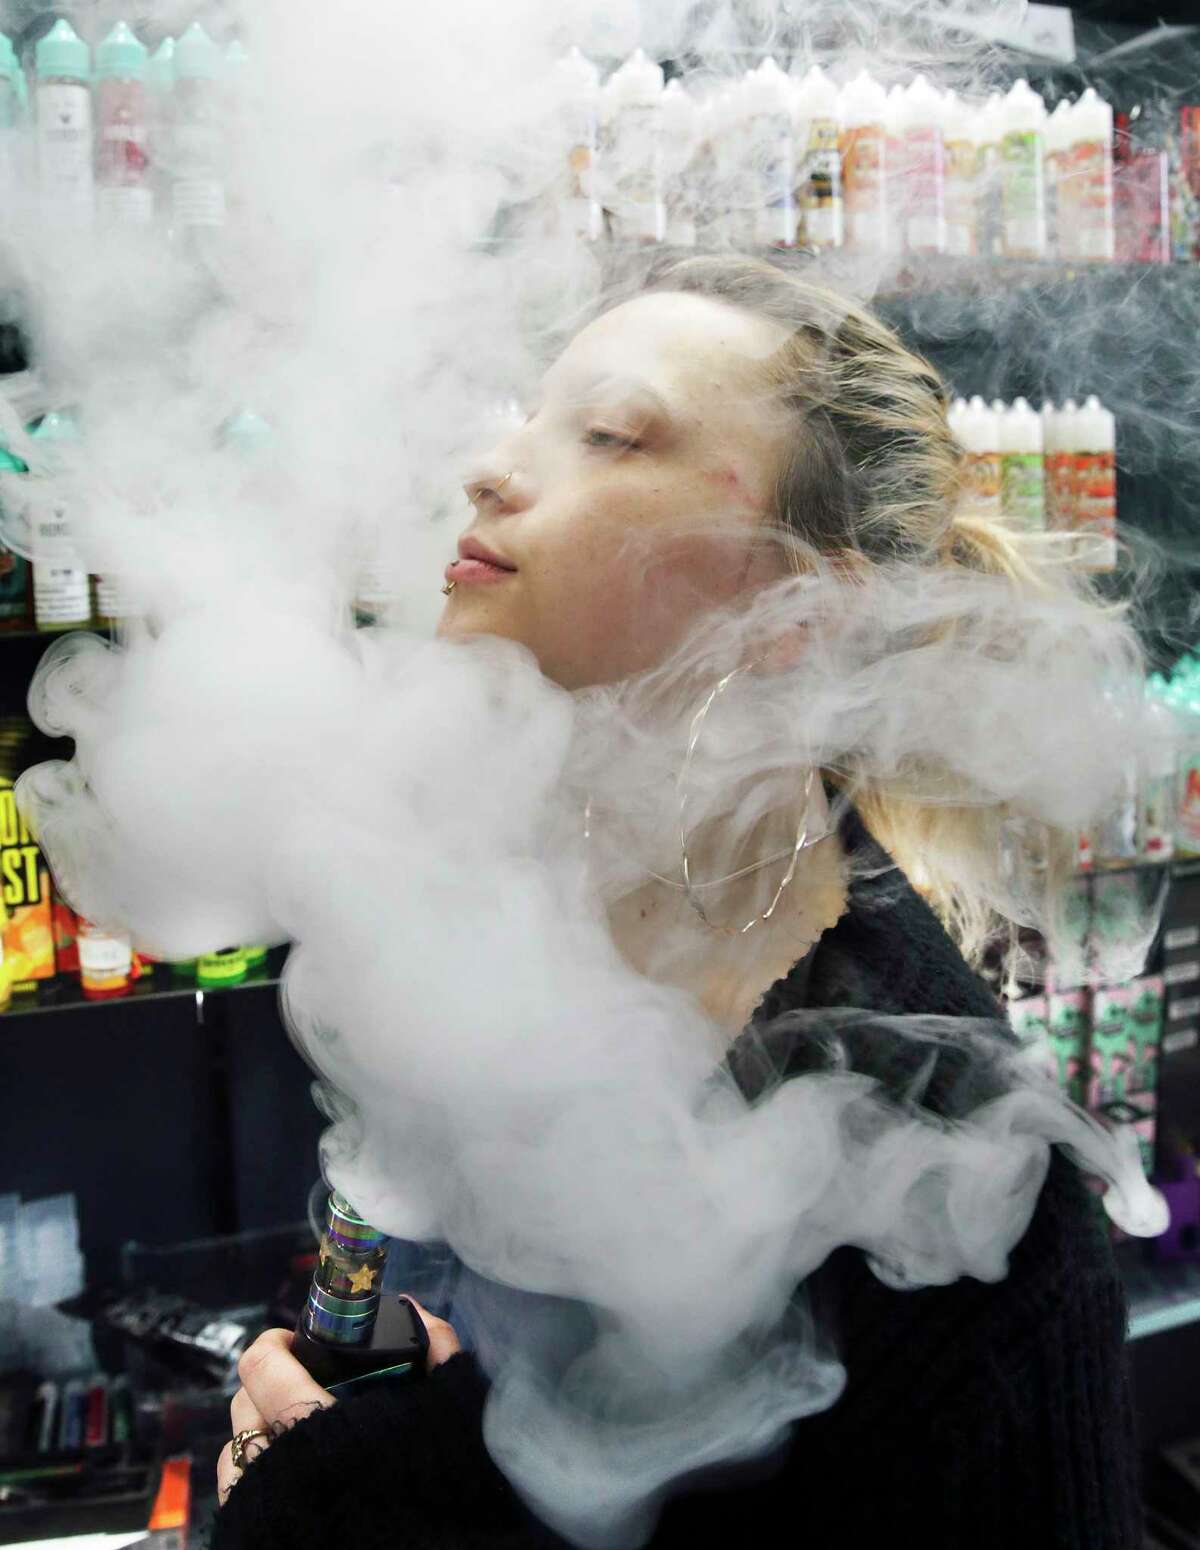 Claire Collingwood is surrounded in a cloud of vapor as she exhales after using a vaping device.